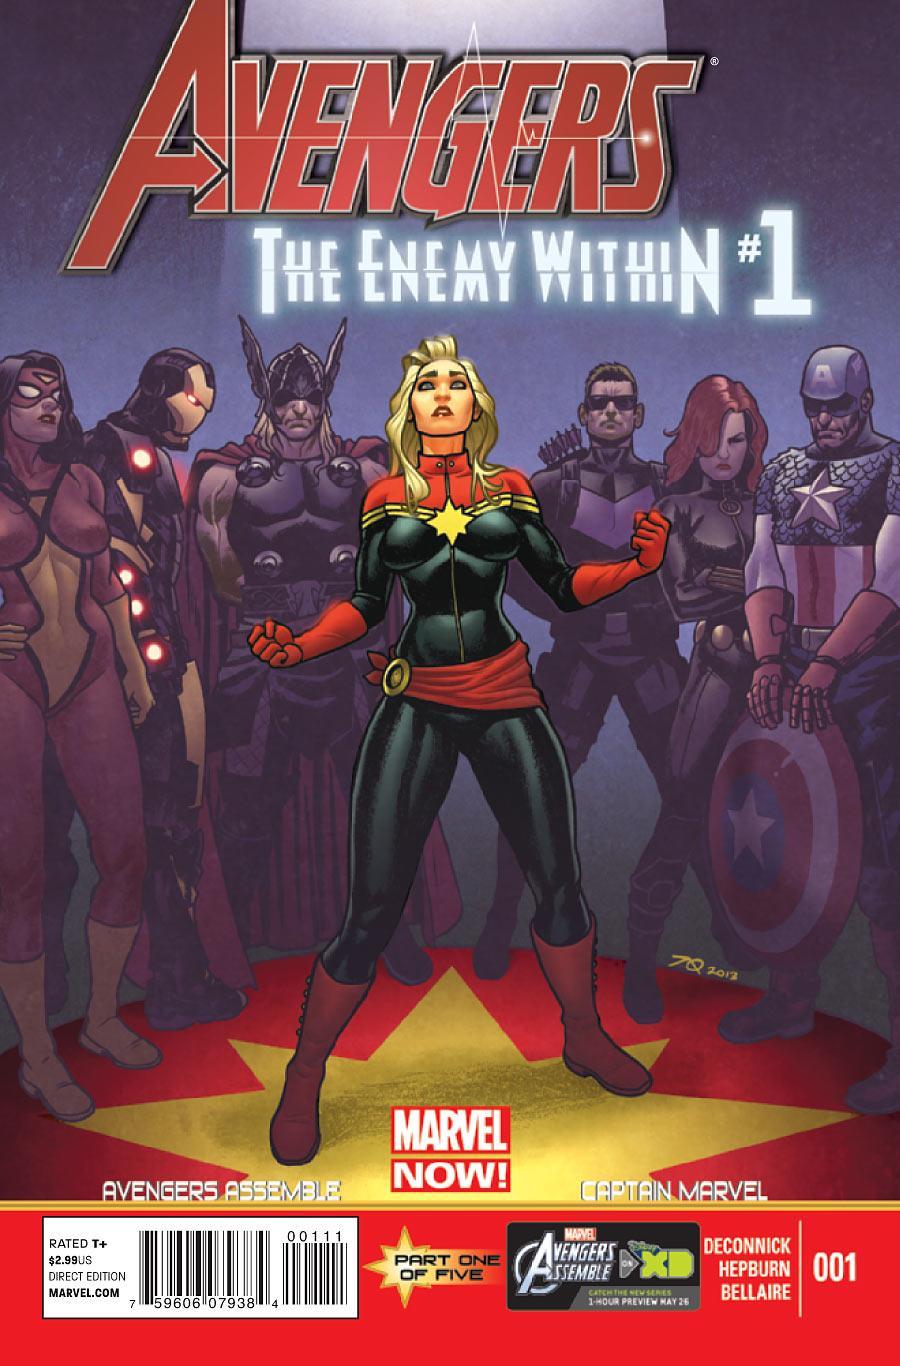 Avengers: The Enemy Within Vol. 1 #1